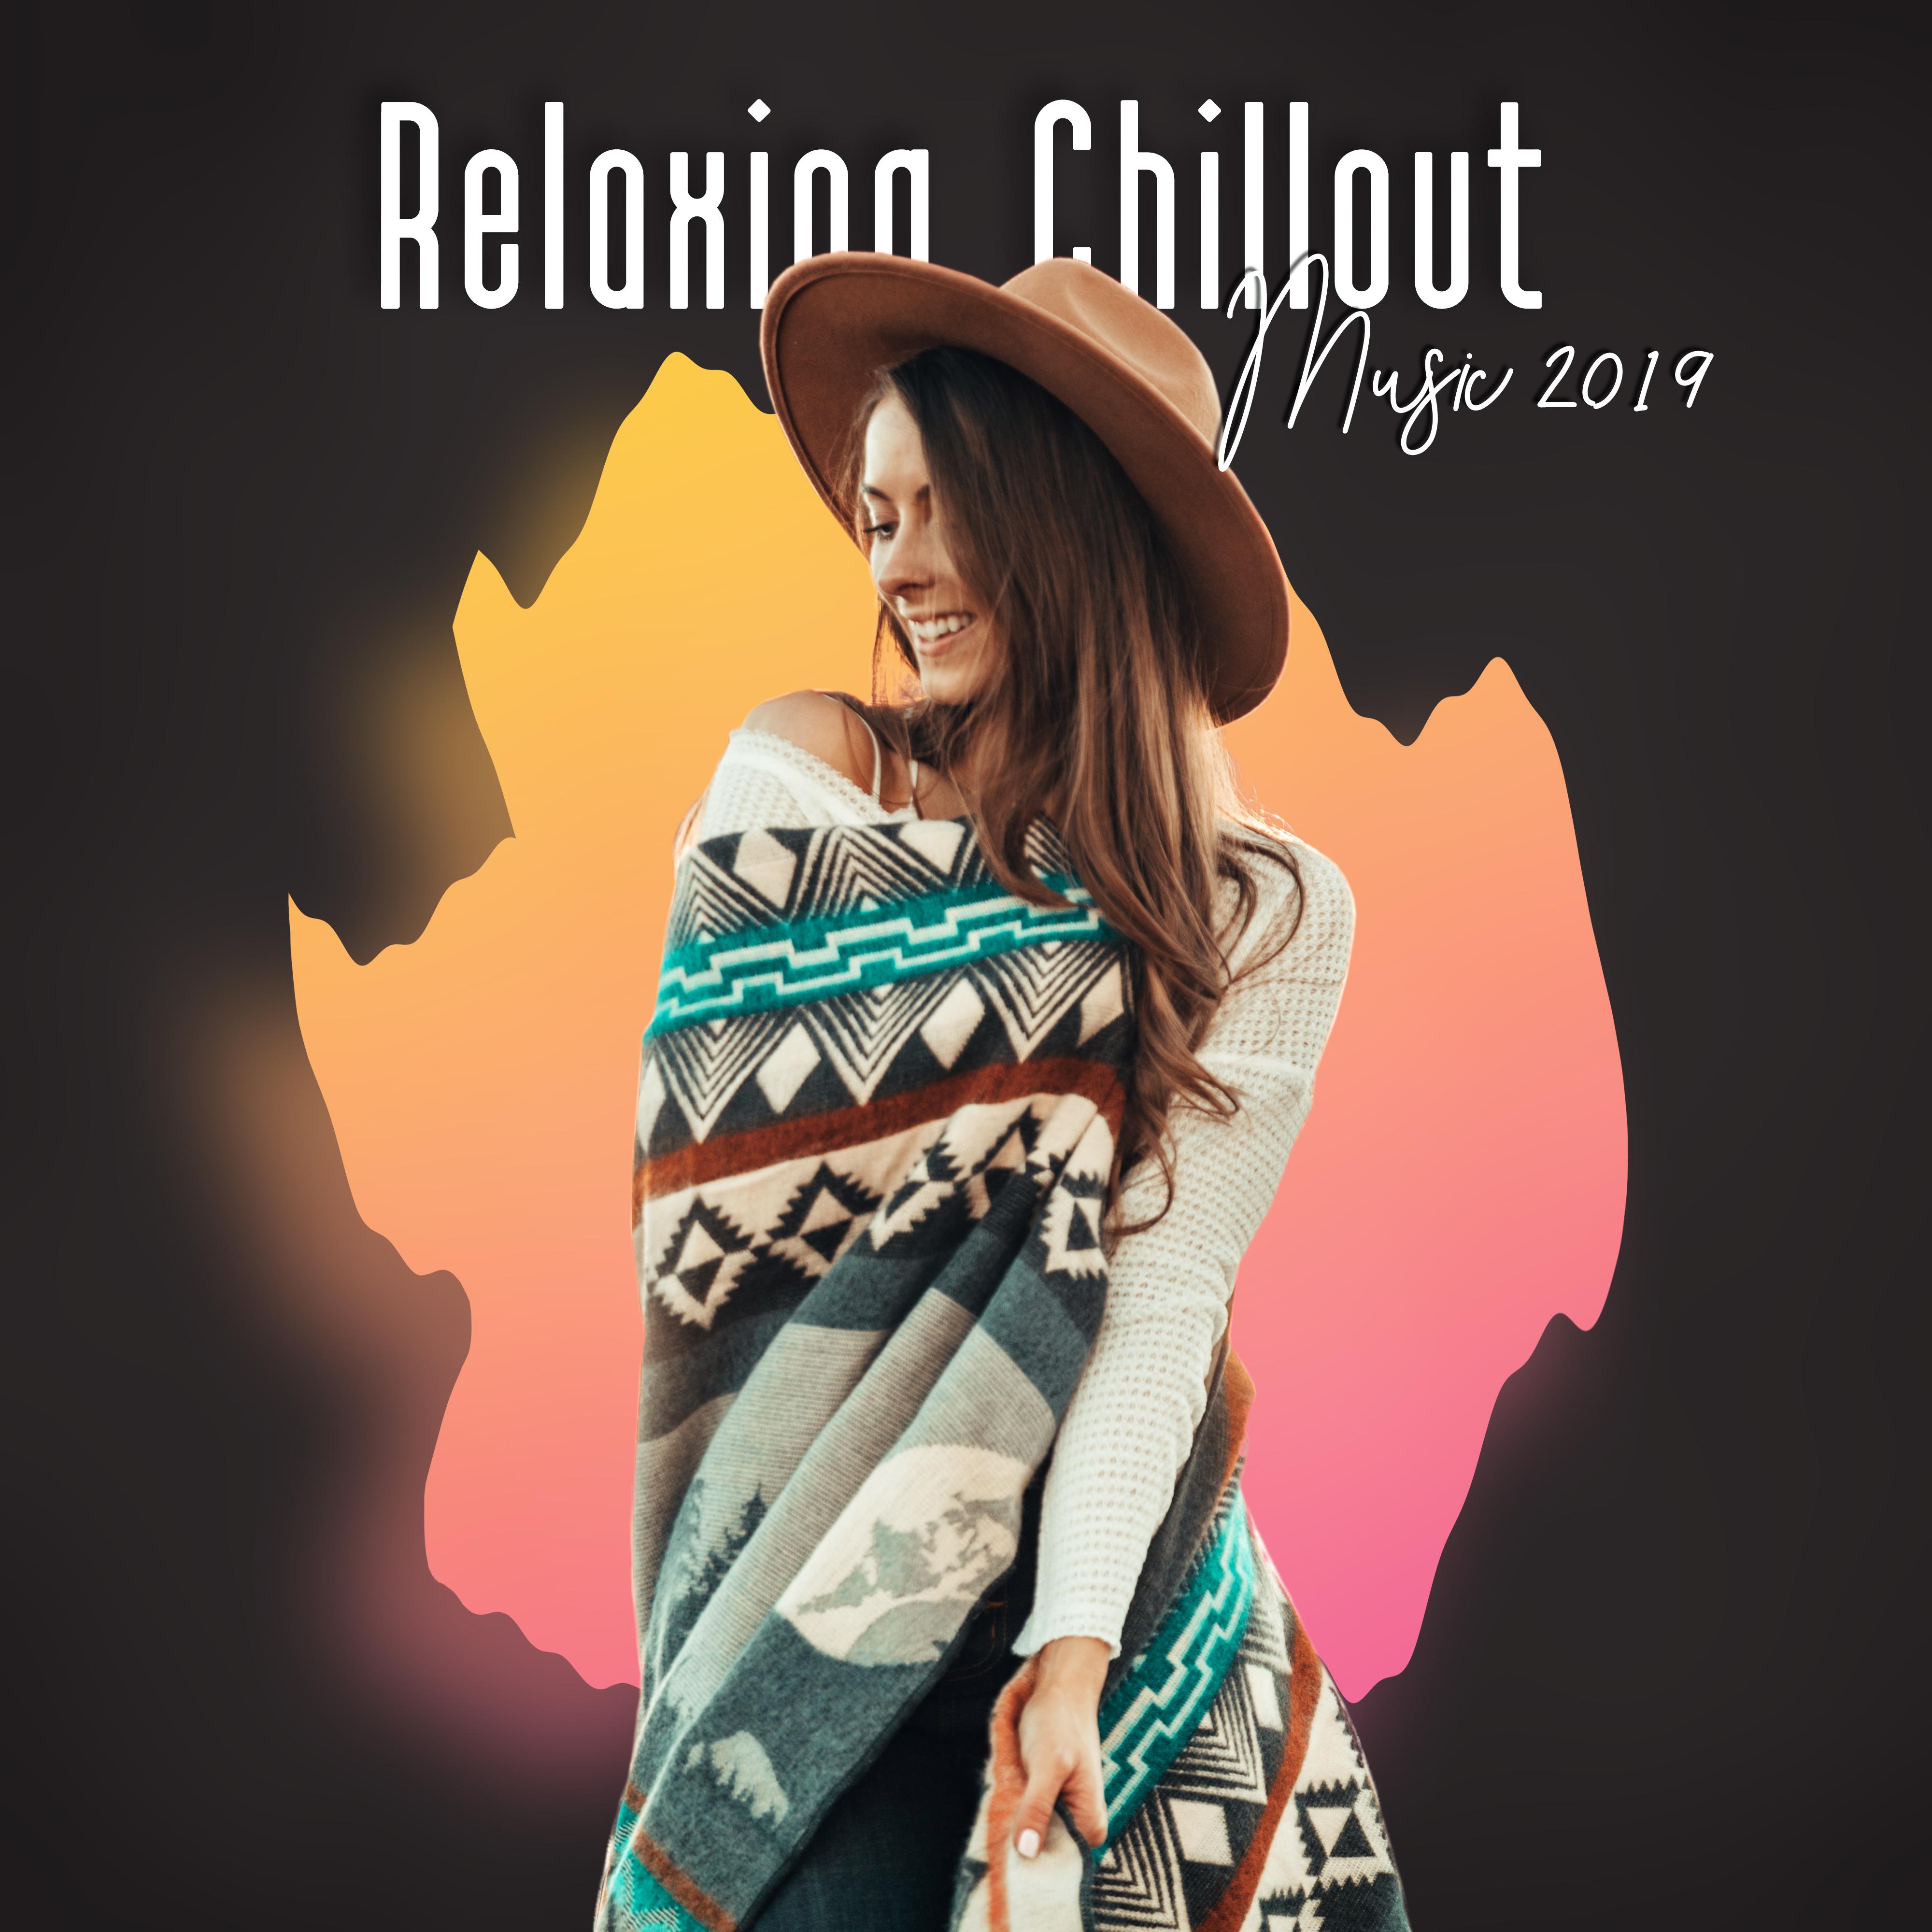 Relaxing Chillout Music 2019